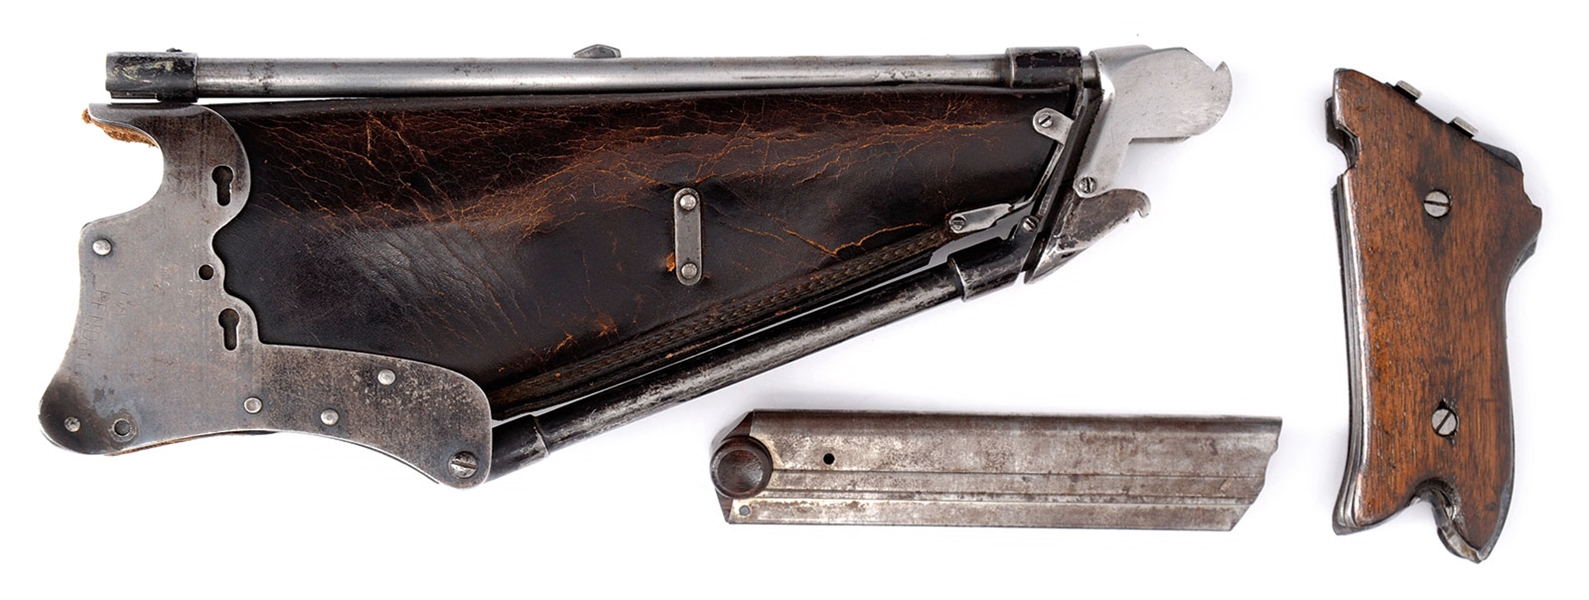 RARE LUGER IDEAL STOCK WITH GRIPS AND MAG.                                                                                                                                                              